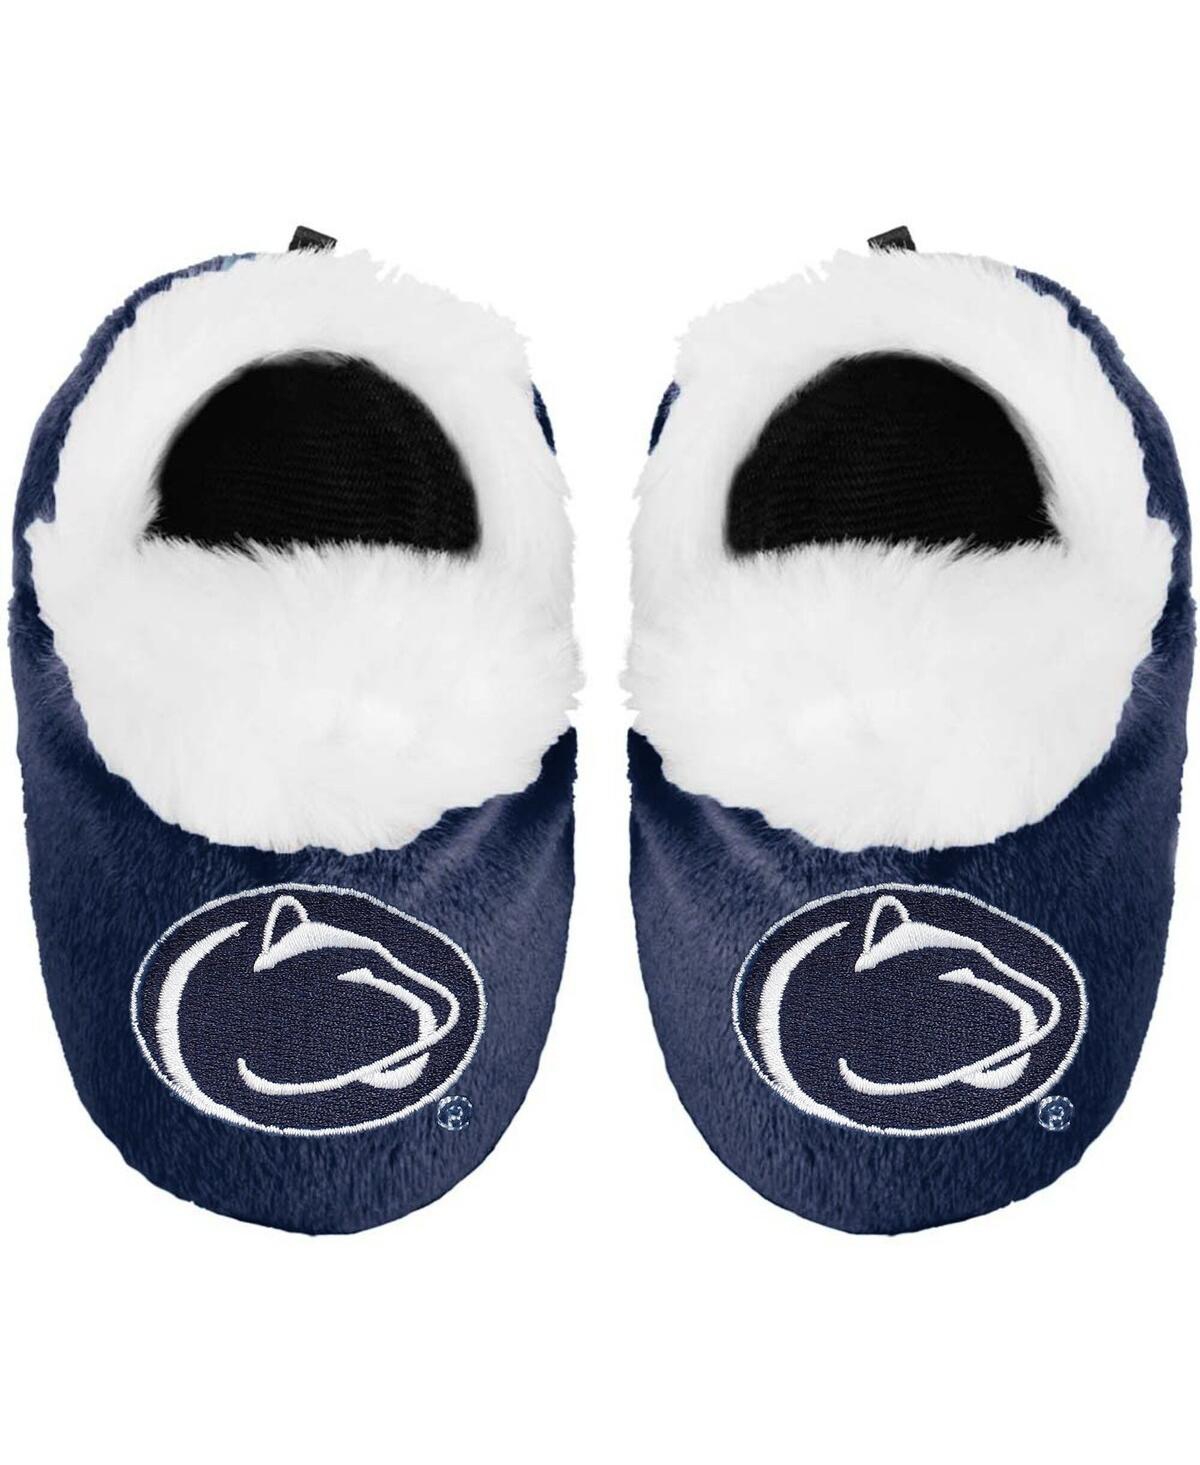 Foco Babies' Newborn And Infant Boys And Girls  Penn State Nittany Lions Booties In Navy